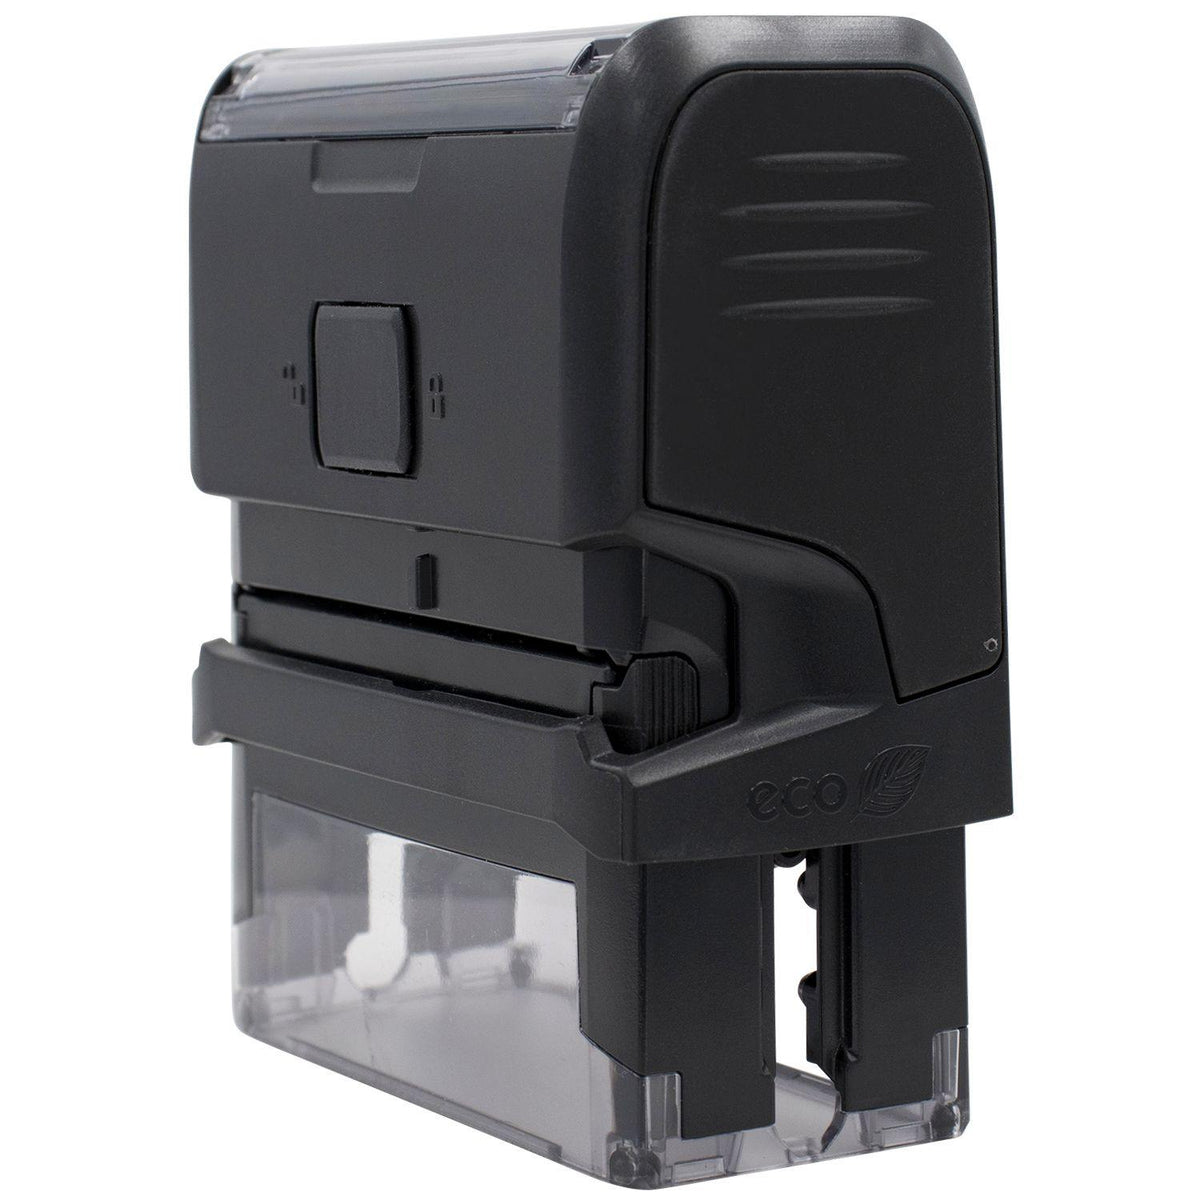 Self-Inking This Envelop has been Sealed Stamp - Engineer Seal Stamps - Brand_Trodat, Impression Size_Small, Stamp Type_Self-Inking Stamp, Type of Use_Postal &amp; Mailing